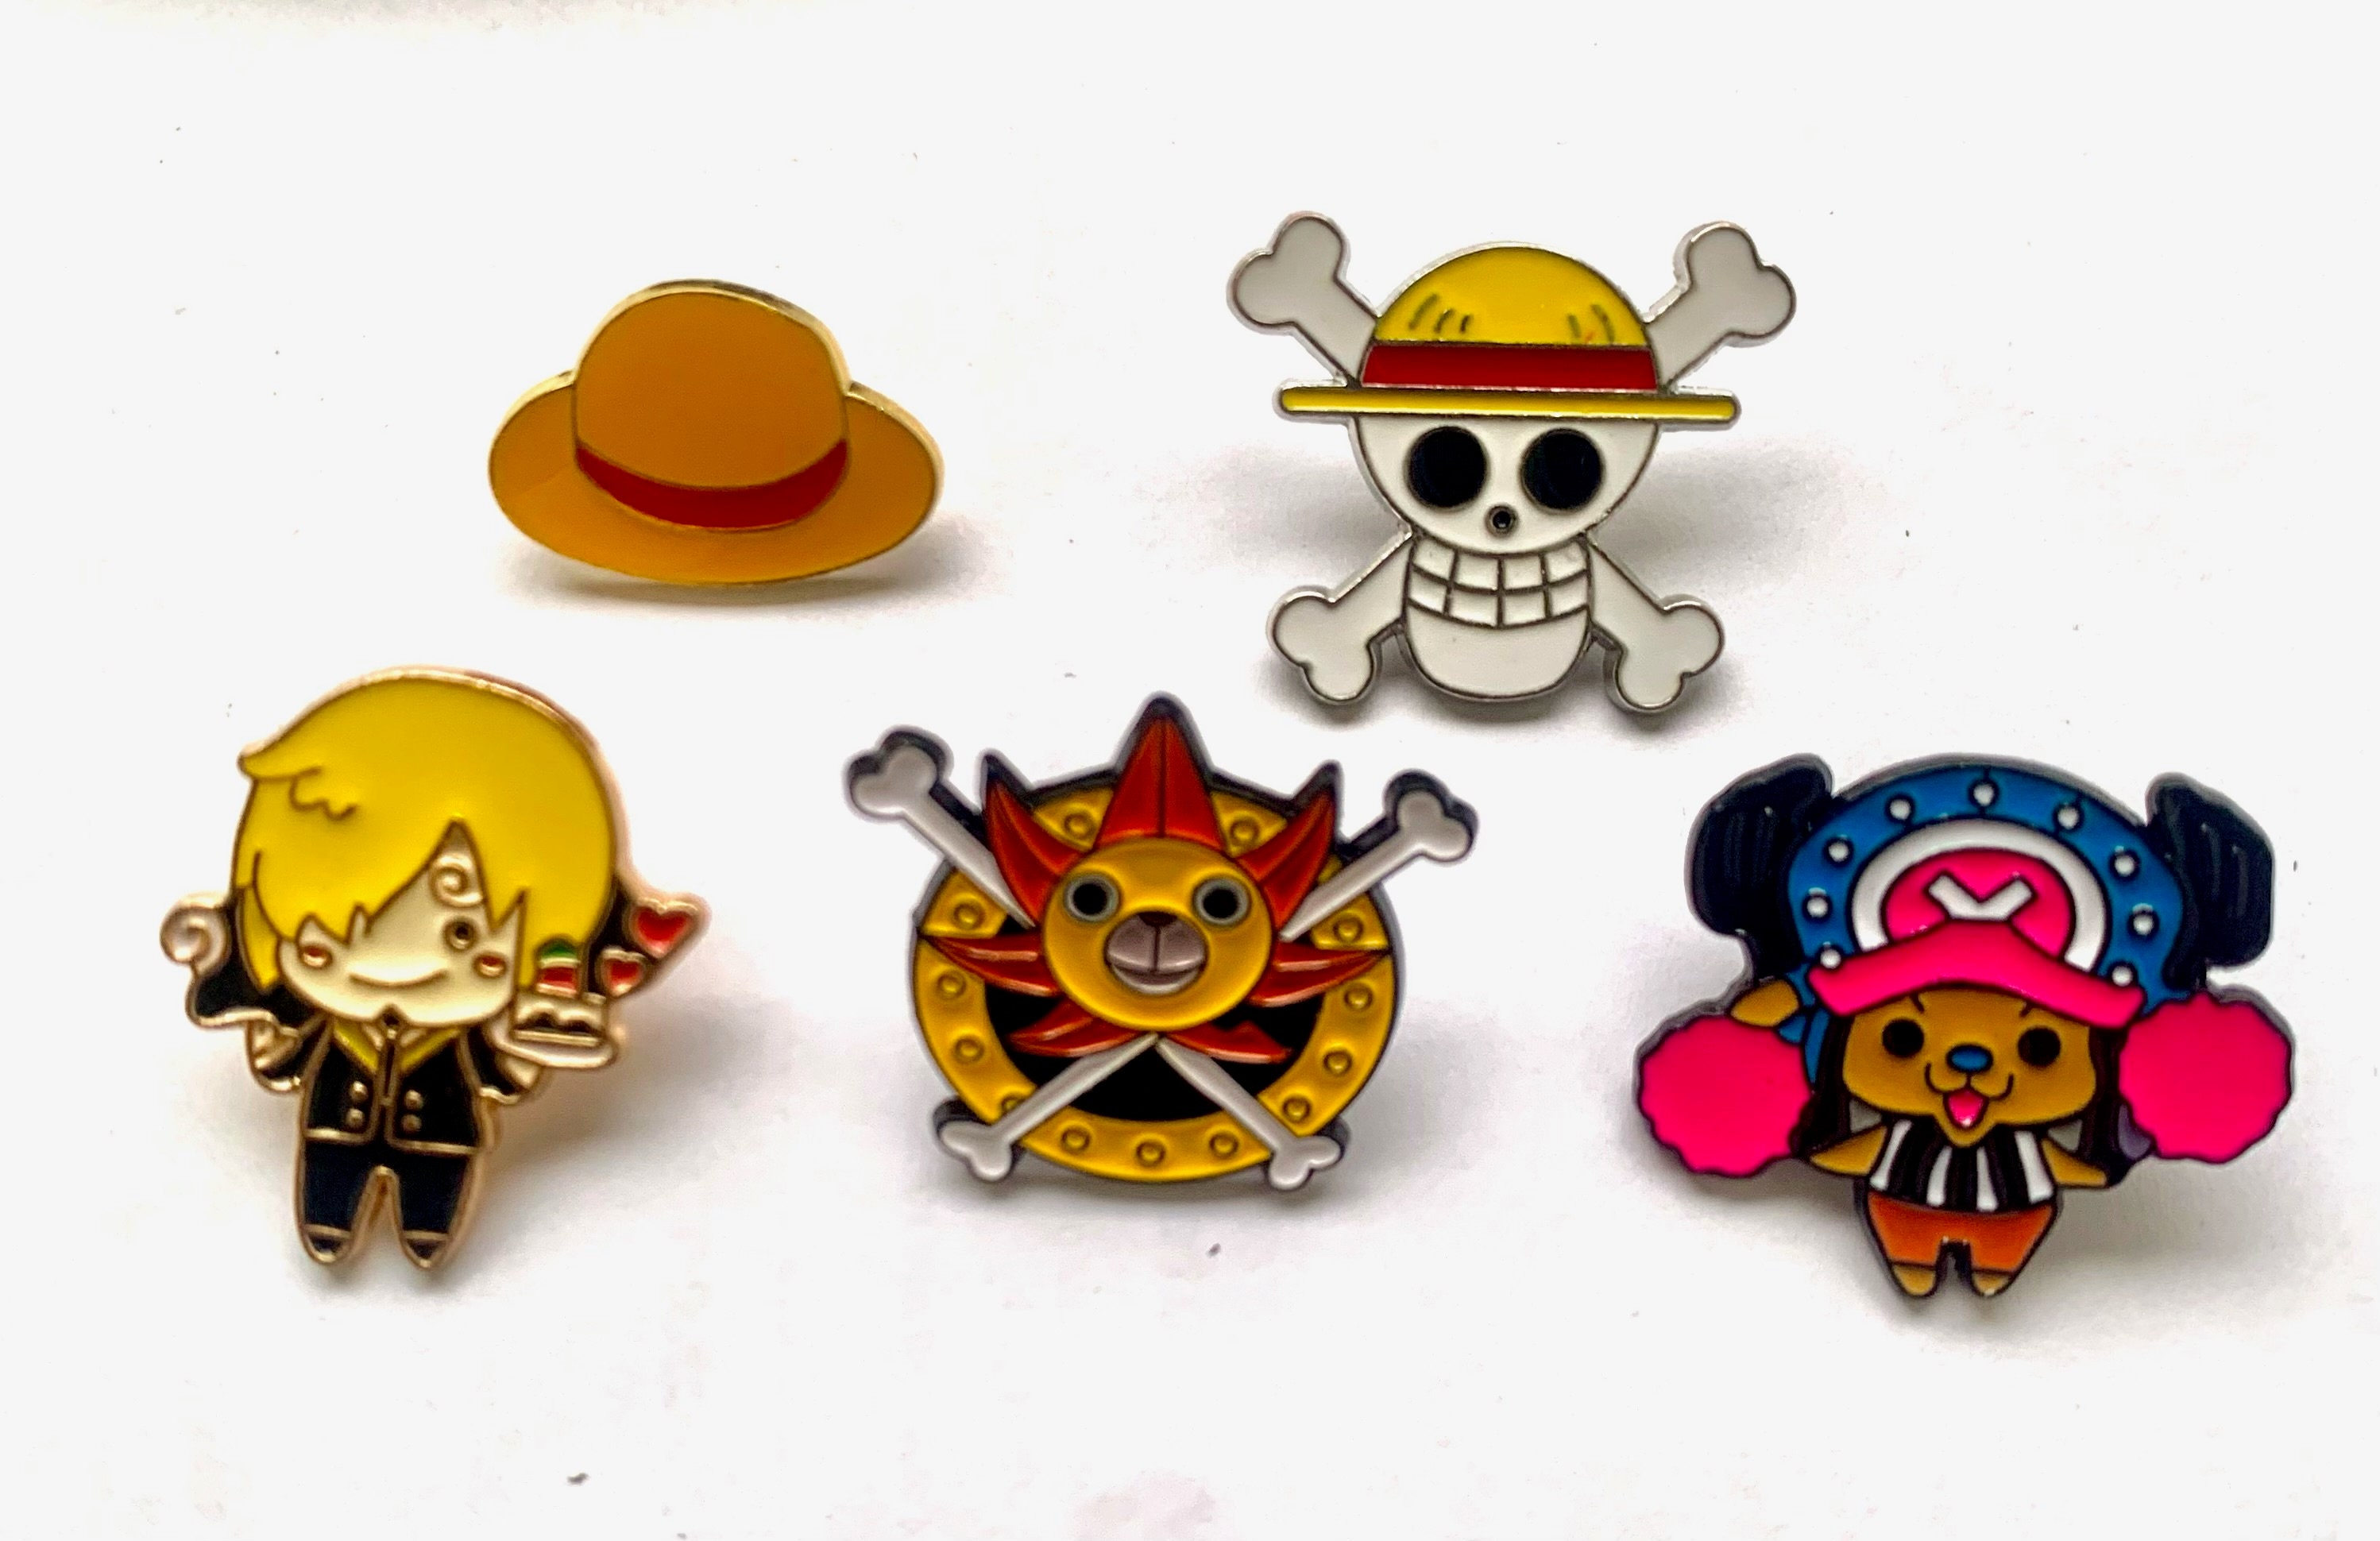 ONE PIECE LUFFY LUCKY CAT Enamel Pin, Cool Anime Pins, Pirate Pin